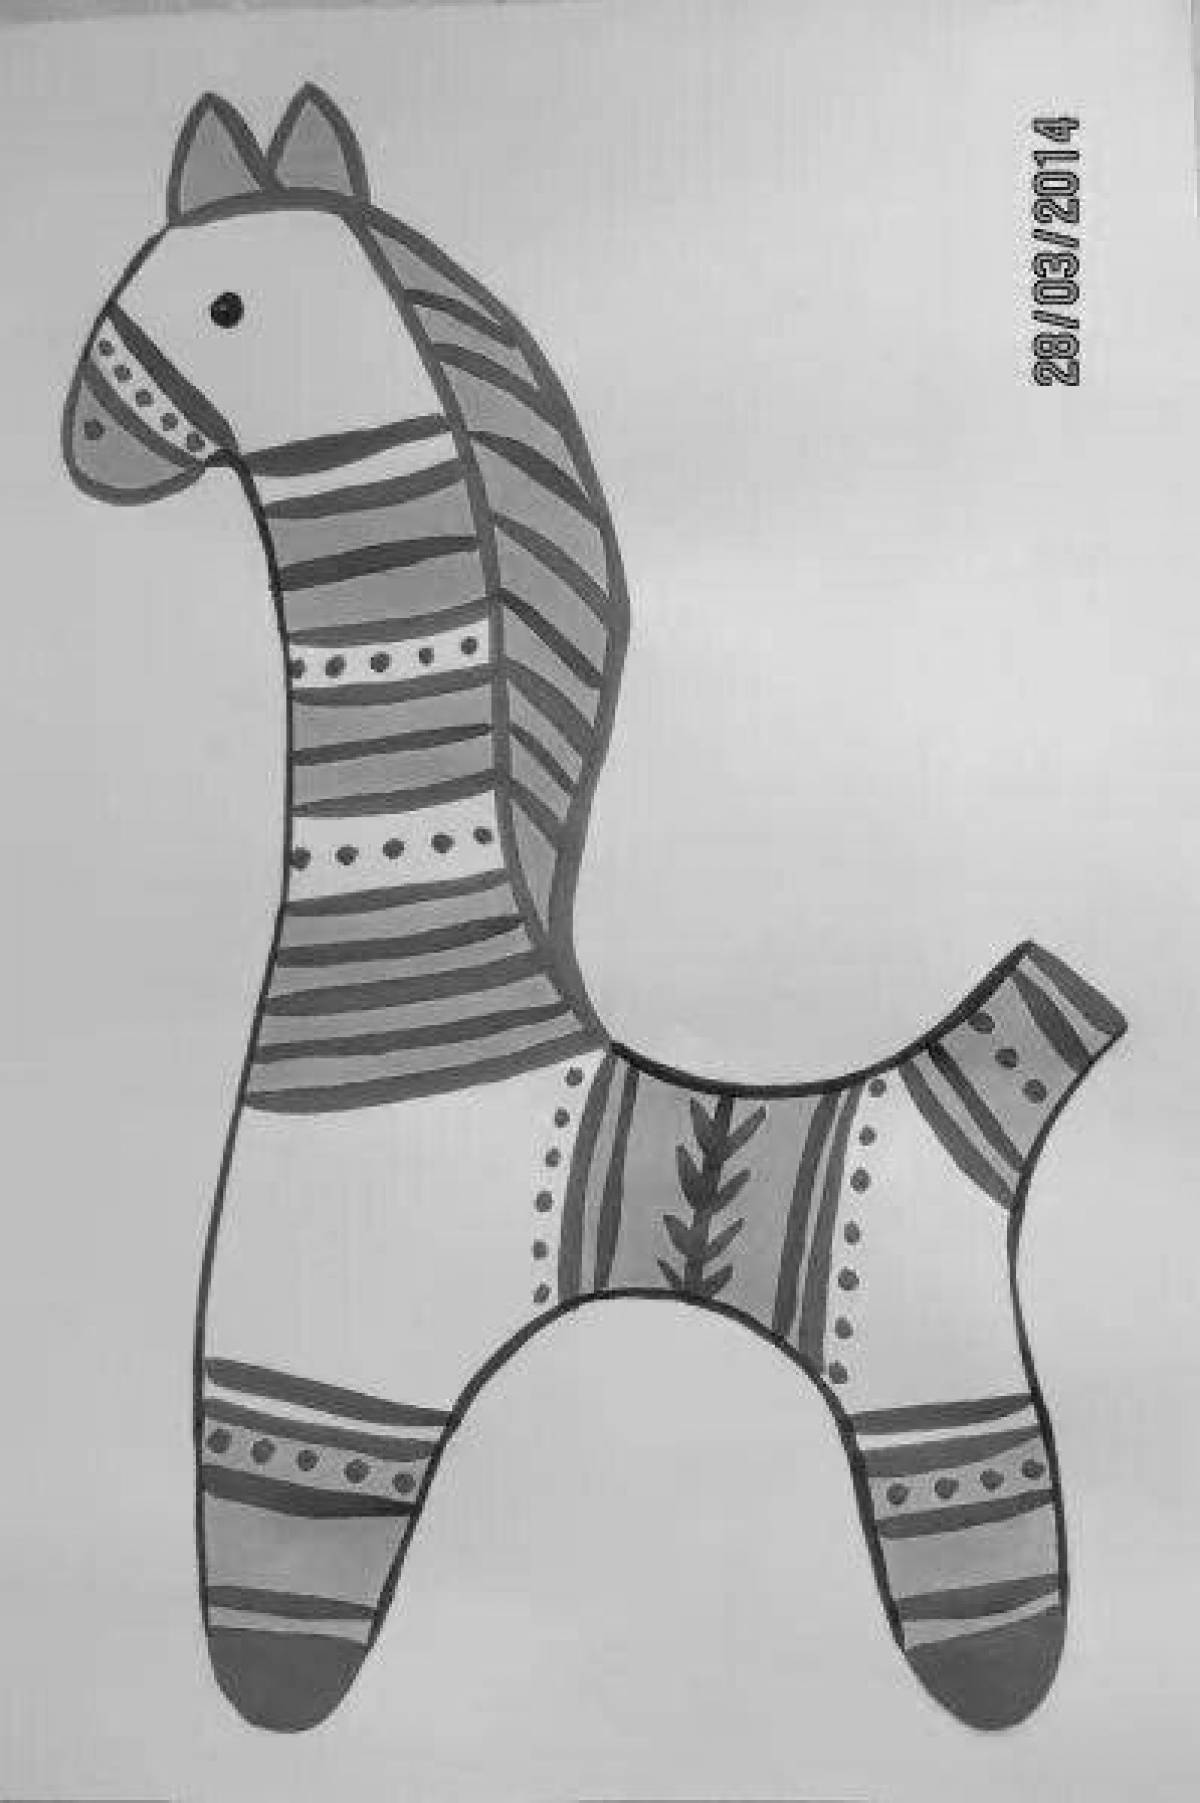 Coloring page Filimonov's charming horse